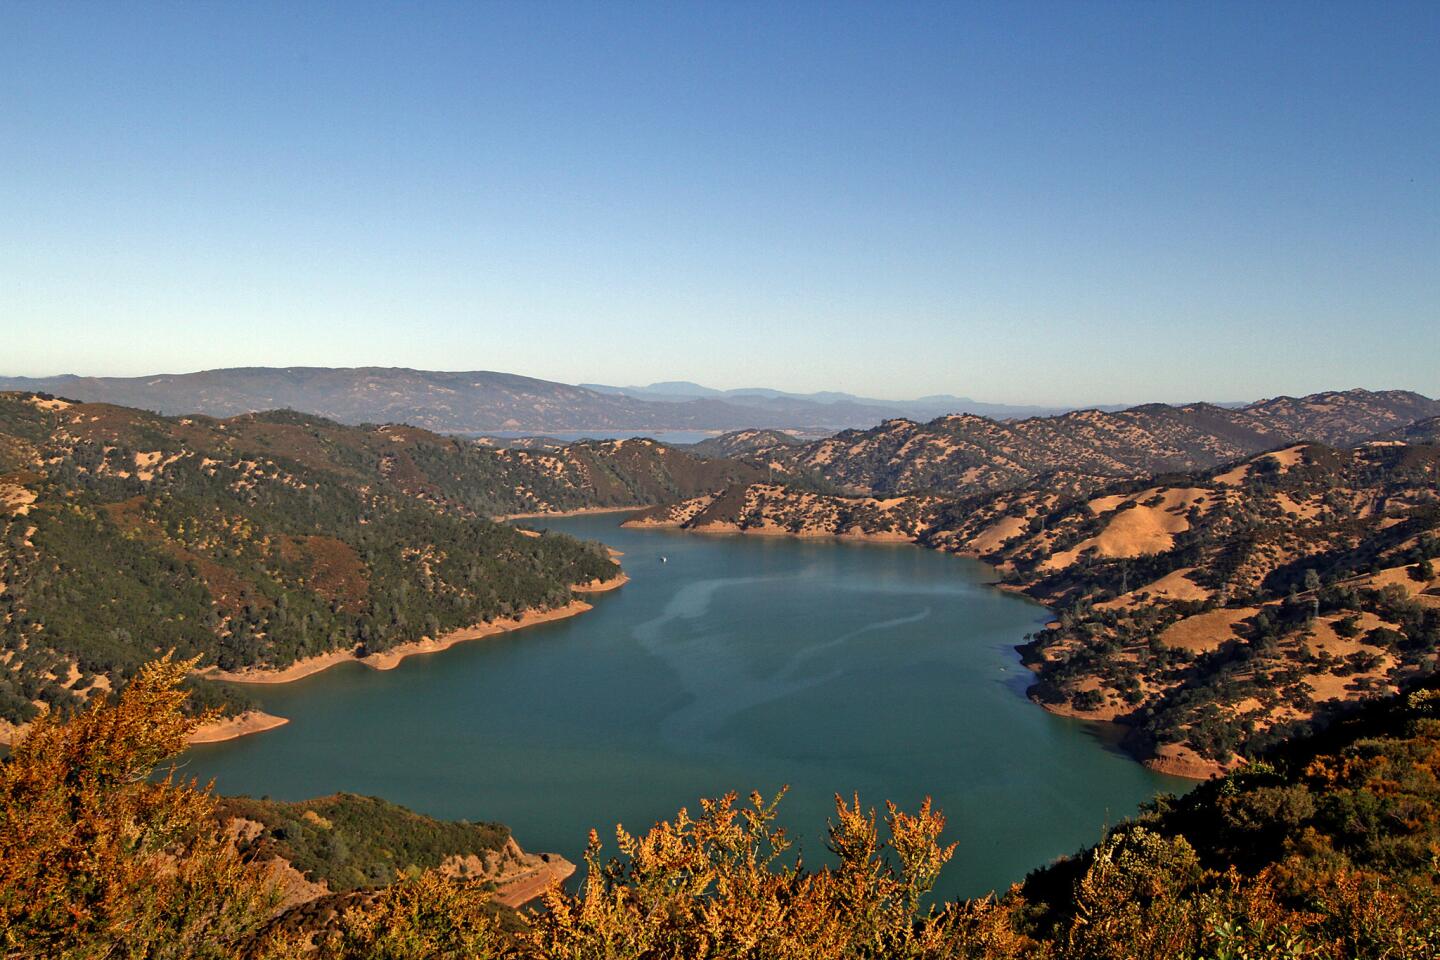 Lake Berryessa from atop the Cold Canyon-Blue Ridge Loop Trail in the Stebbins Cold Canyon Reserve. The lake is a popular spot for campers and boaters and is usually busy during the summer.